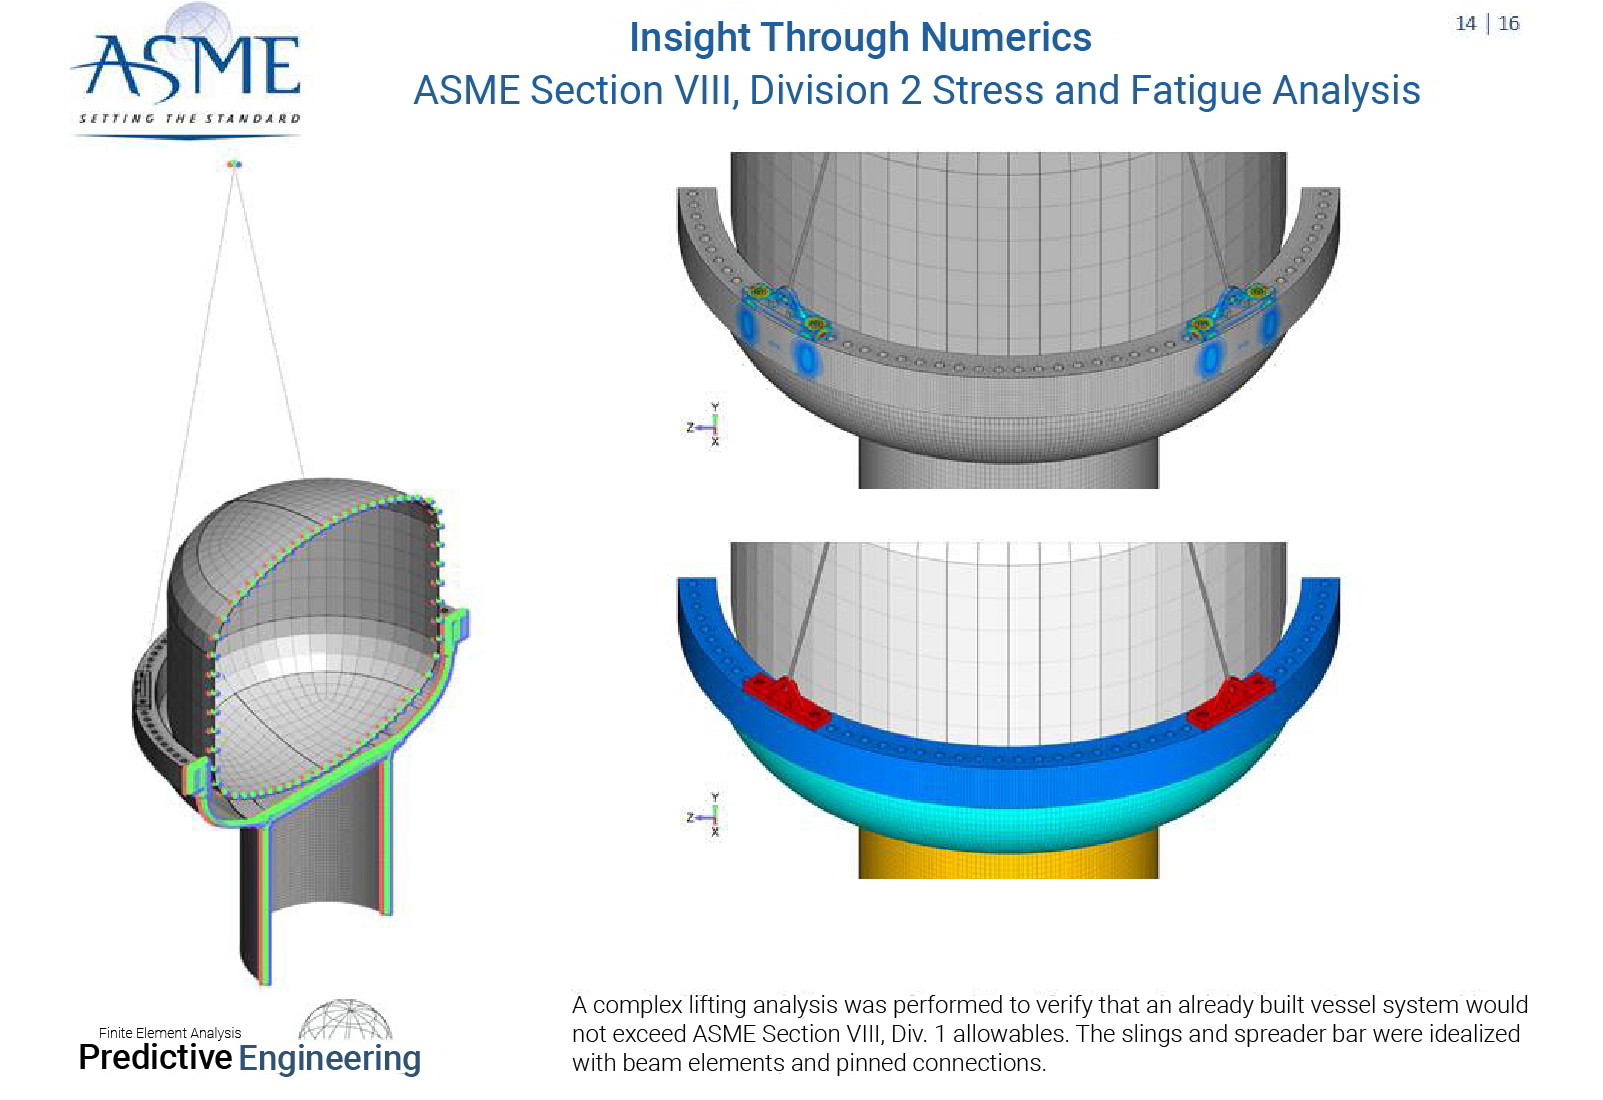 A complex lifting analysis was performed to verify that an already built vessel system would not exceed ASME Section VIII, Div. 1 allowables - Predictive Engineering ASME BPVC Pressure Vessel Consulting Services